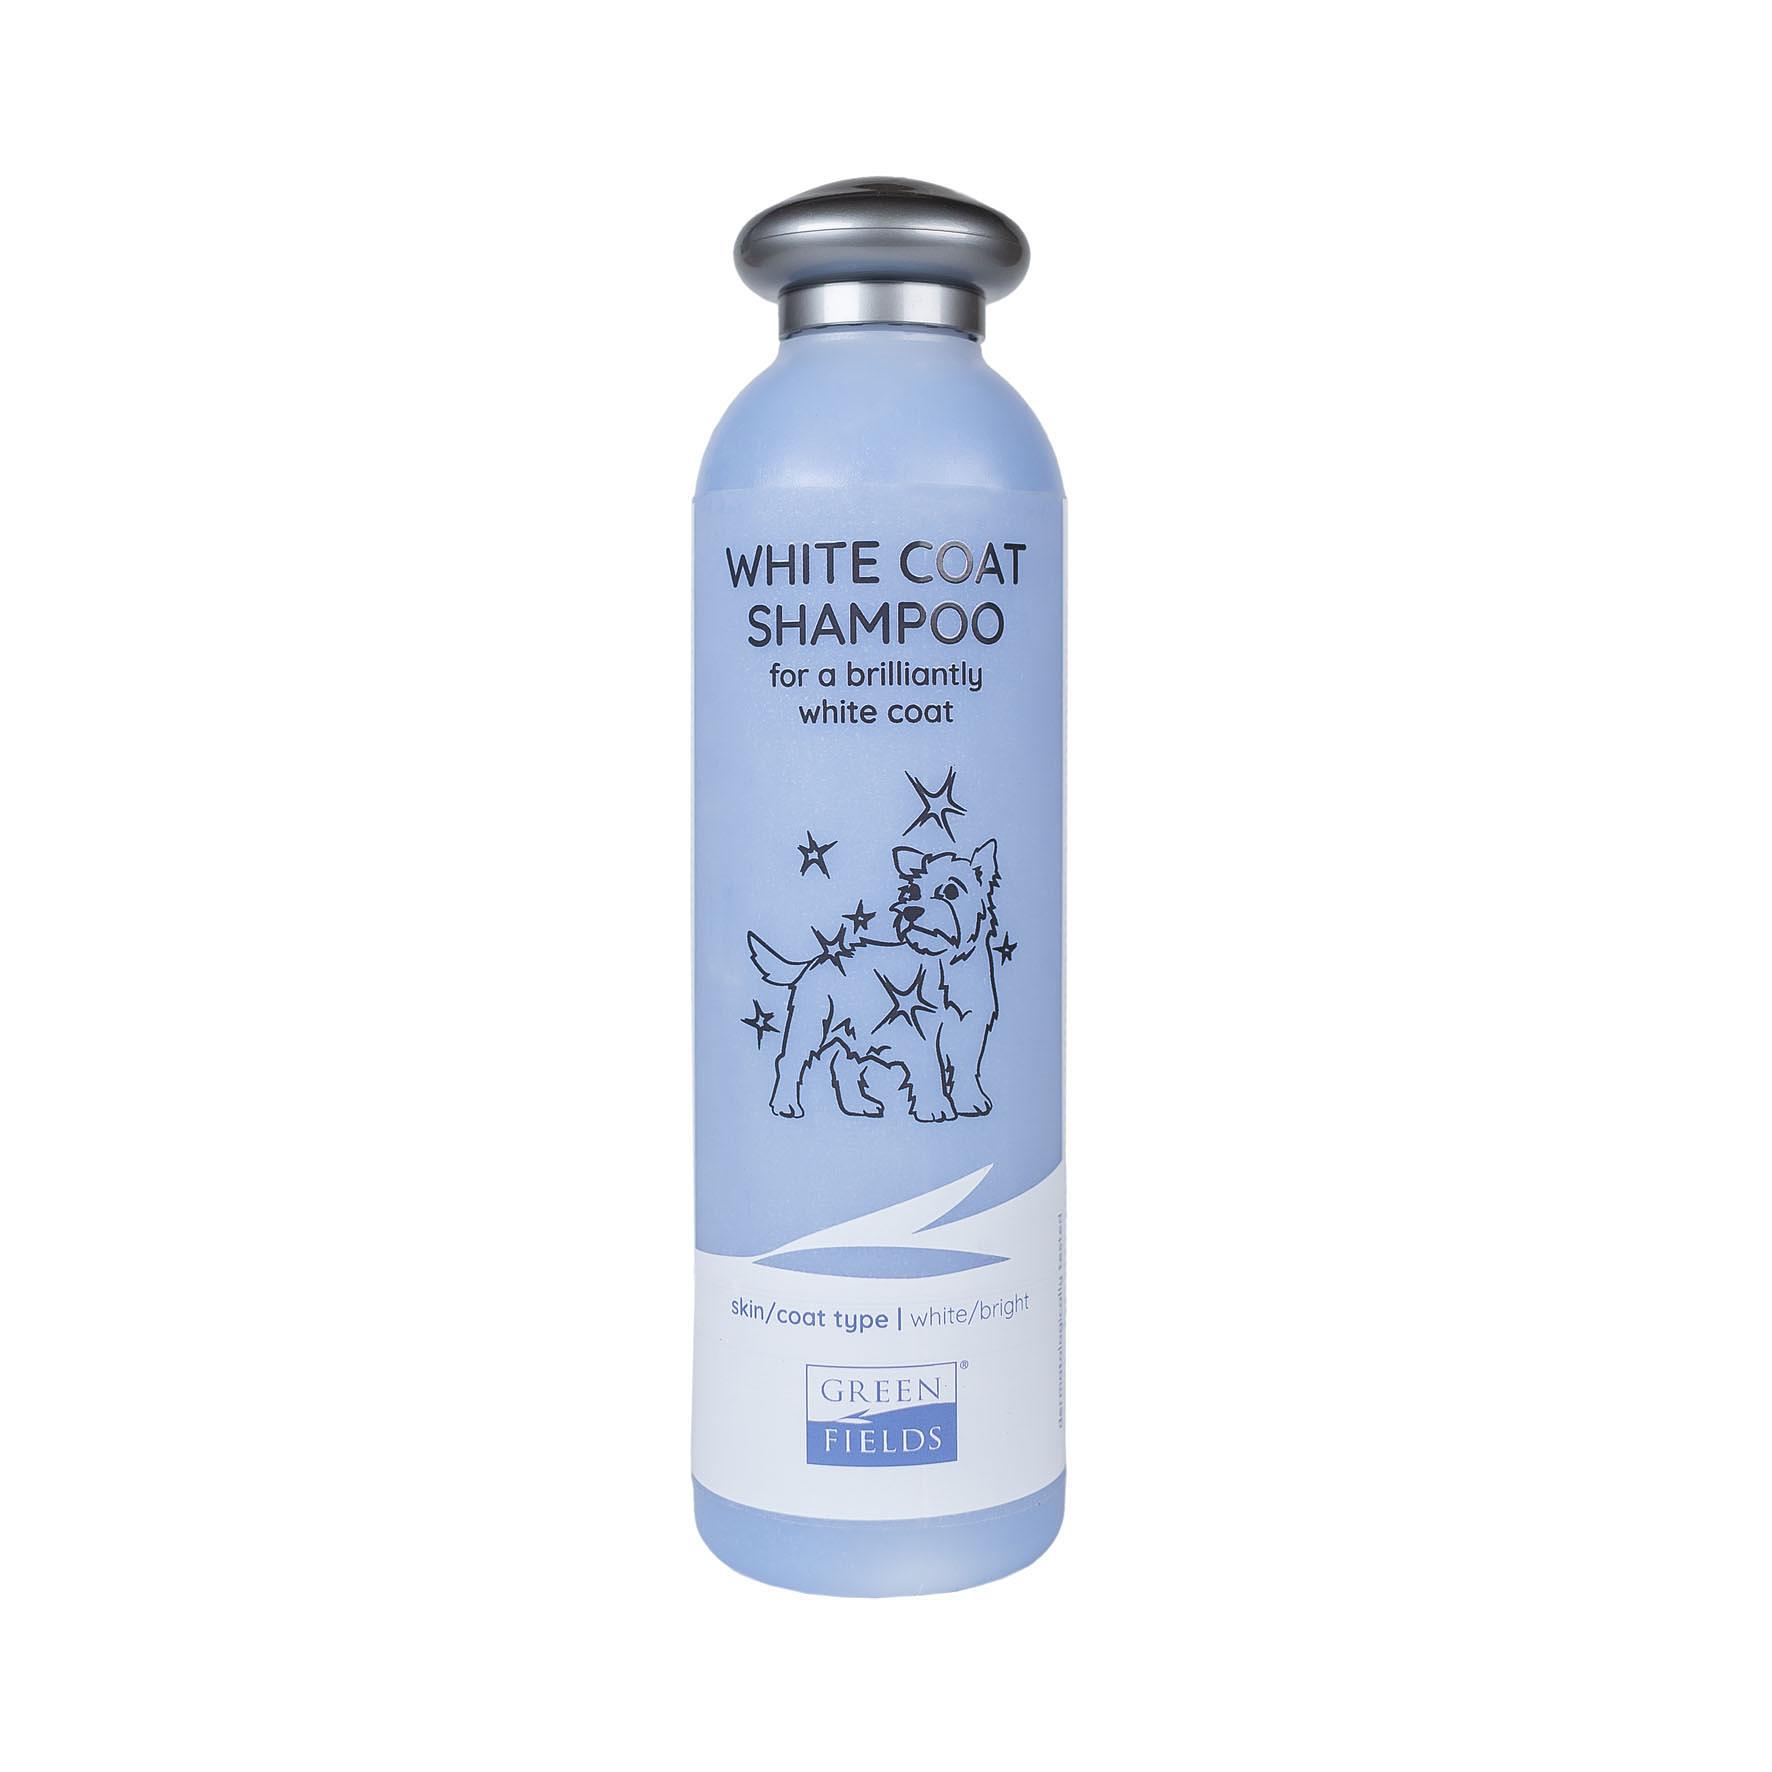 Greenfields White Coat Shampoo for a brilliantly white coat